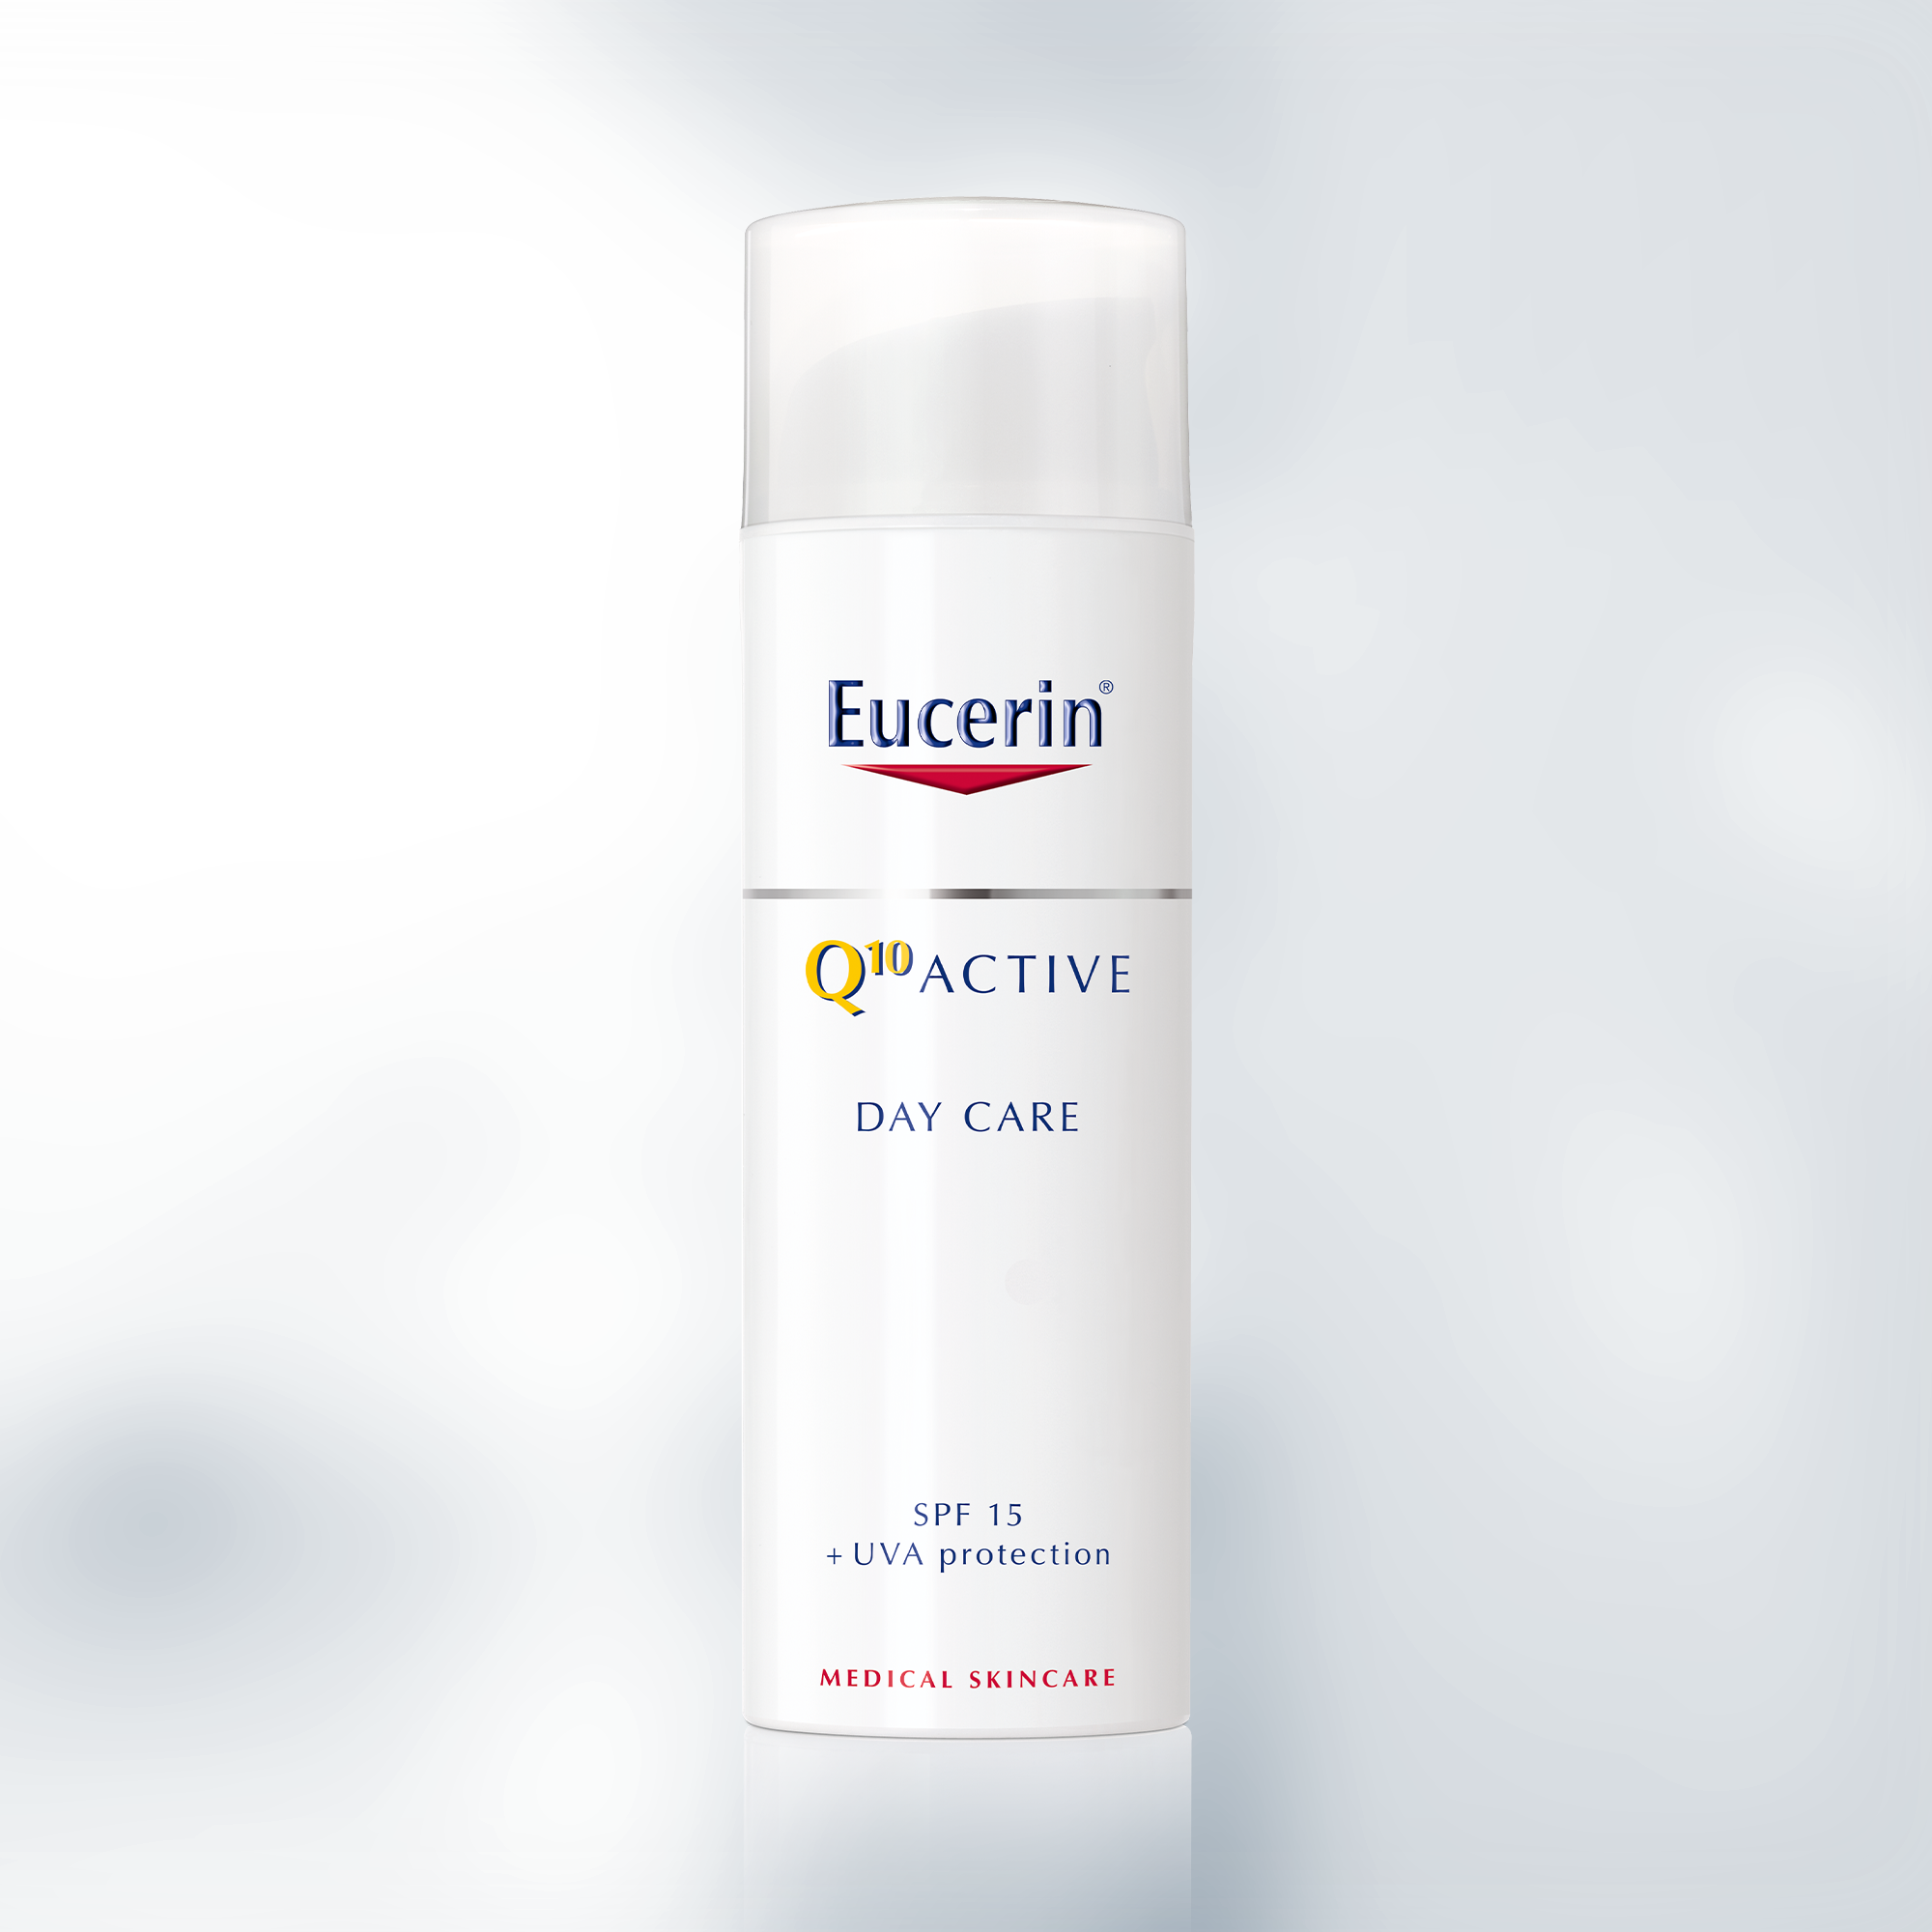 Eucerin Q10 ACTIVE Day Cream for normal to combination skin